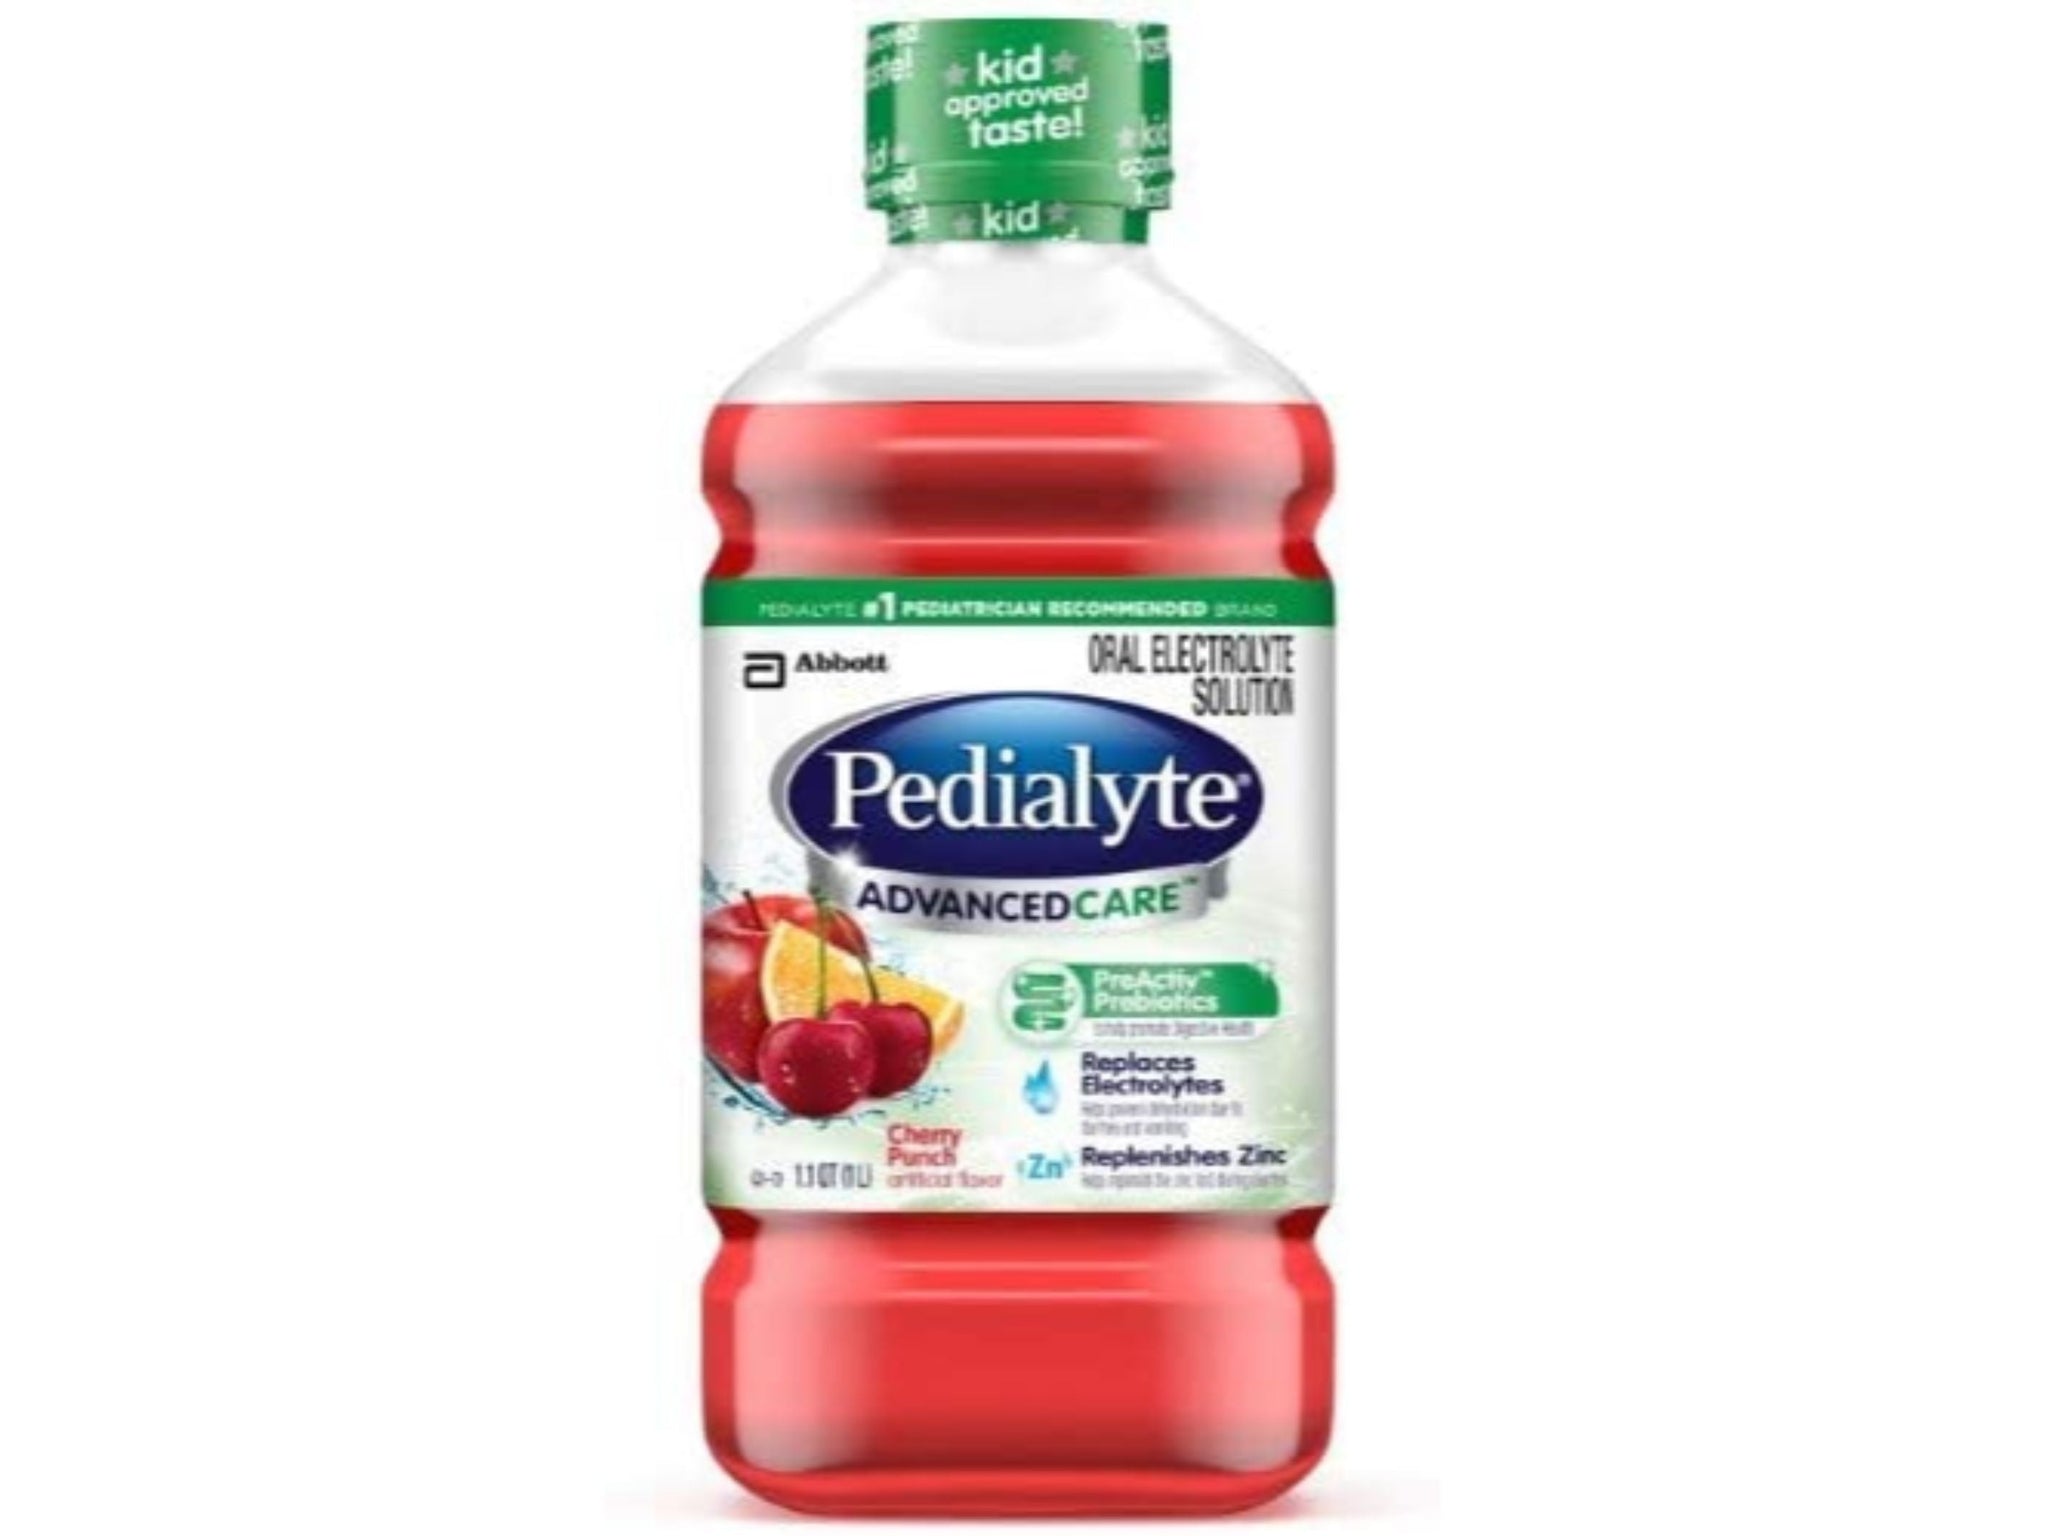 Pedialyte Advanced Care Oral Electrolyte Solution, Cherry Punch - 33.8 oz